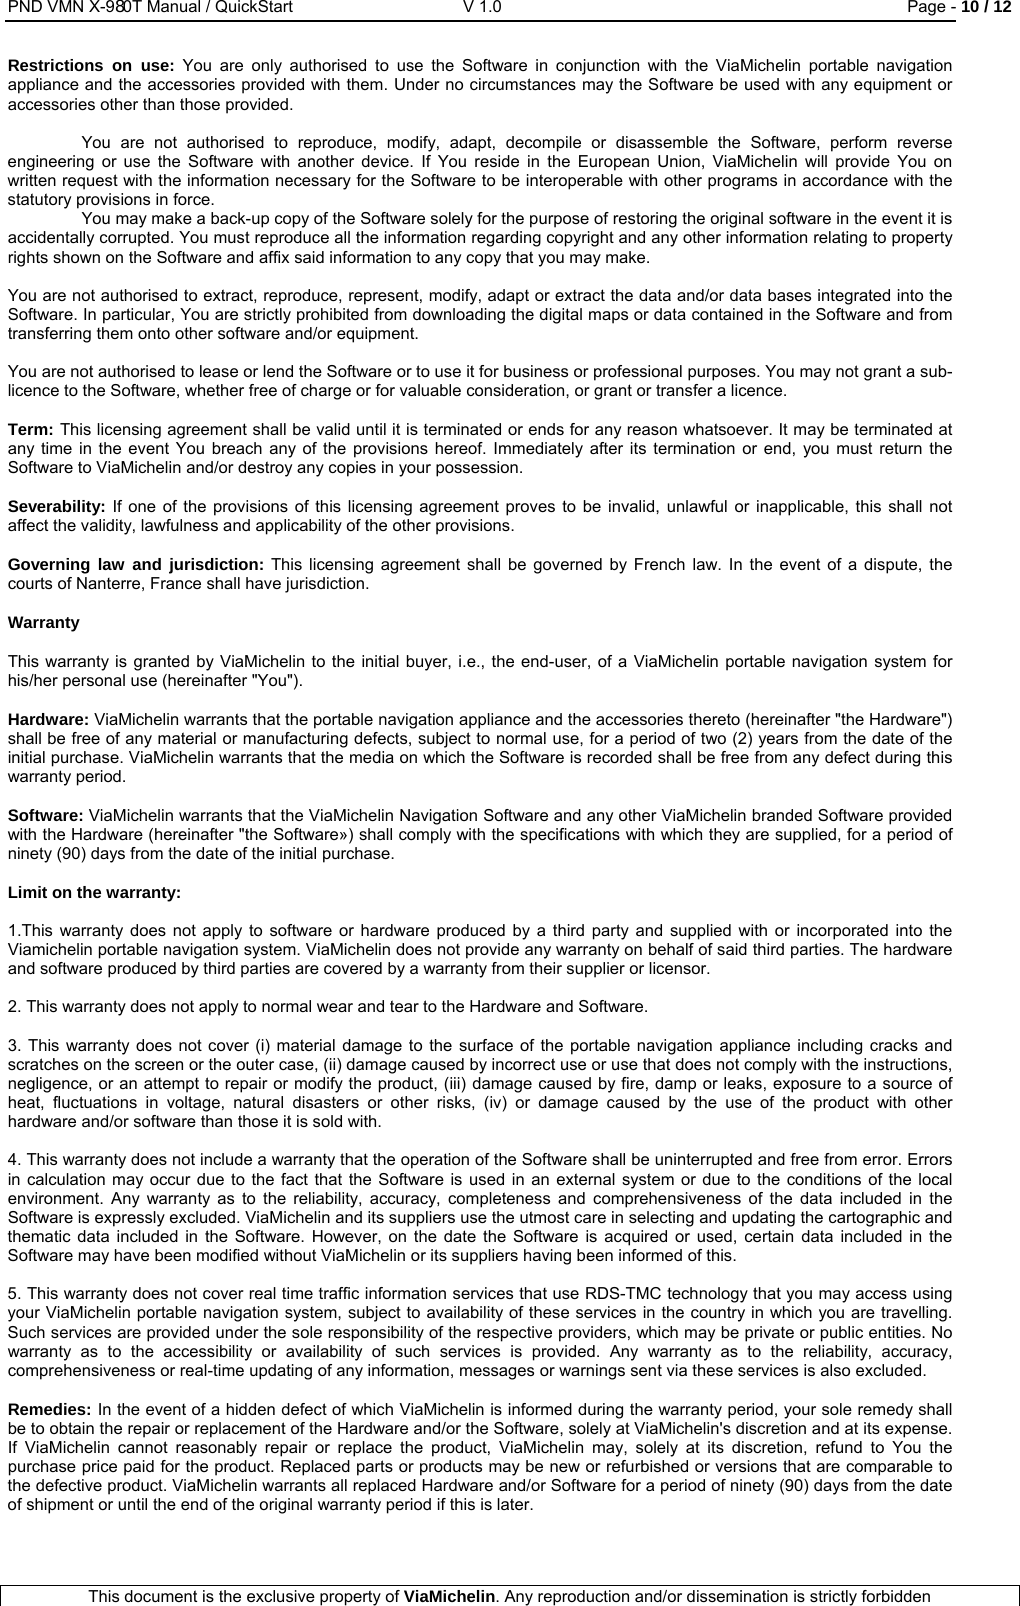 PND VMN X-980T Manual / QuickStart   V 1.0  Page - 10 / 12  This document is the exclusive property of ViaMichelin. Any reproduction and/or dissemination is strictly forbidden  Restrictions on use: You are only authorised to use the Software in conjunction with the ViaMichelin portable navigation appliance and the accessories provided with them. Under no circumstances may the Software be used with any equipment or accessories other than those provided.  You are not authorised to reproduce, modify, adapt, decompile or disassemble the Software, perform reverse engineering or use the Software with another device. If You reside in the European Union, ViaMichelin will provide You on written request with the information necessary for the Software to be interoperable with other programs in accordance with the statutory provisions in force.  You may make a back-up copy of the Software solely for the purpose of restoring the original software in the event it is accidentally corrupted. You must reproduce all the information regarding copyright and any other information relating to property rights shown on the Software and affix said information to any copy that you may make.  You are not authorised to extract, reproduce, represent, modify, adapt or extract the data and/or data bases integrated into the Software. In particular, You are strictly prohibited from downloading the digital maps or data contained in the Software and from transferring them onto other software and/or equipment.   You are not authorised to lease or lend the Software or to use it for business or professional purposes. You may not grant a sub-licence to the Software, whether free of charge or for valuable consideration, or grant or transfer a licence.  Term: This licensing agreement shall be valid until it is terminated or ends for any reason whatsoever. It may be terminated at any time in the event You breach any of the provisions hereof. Immediately after its termination or end, you must return the Software to ViaMichelin and/or destroy any copies in your possession.  Severability: If one of the provisions of this licensing agreement proves to be invalid, unlawful or inapplicable, this shall not affect the validity, lawfulness and applicability of the other provisions.   Governing law and jurisdiction: This licensing agreement shall be governed by French law. In the event of a dispute, the courts of Nanterre, France shall have jurisdiction.  Warranty   This warranty is granted by ViaMichelin to the initial buyer, i.e., the end-user, of a ViaMichelin portable navigation system for his/her personal use (hereinafter &quot;You&quot;).  Hardware: ViaMichelin warrants that the portable navigation appliance and the accessories thereto (hereinafter &quot;the Hardware&quot;) shall be free of any material or manufacturing defects, subject to normal use, for a period of two (2) years from the date of the initial purchase. ViaMichelin warrants that the media on which the Software is recorded shall be free from any defect during this warranty period.  Software: ViaMichelin warrants that the ViaMichelin Navigation Software and any other ViaMichelin branded Software provided with the Hardware (hereinafter &quot;the Software») shall comply with the specifications with which they are supplied, for a period of ninety (90) days from the date of the initial purchase.   Limit on the warranty:   1.This warranty does not apply to software or hardware produced by a third party and supplied with or incorporated into the Viamichelin portable navigation system. ViaMichelin does not provide any warranty on behalf of said third parties. The hardware and software produced by third parties are covered by a warranty from their supplier or licensor.  2. This warranty does not apply to normal wear and tear to the Hardware and Software.  3. This warranty does not cover (i) material damage to the surface of the portable navigation appliance including cracks and scratches on the screen or the outer case, (ii) damage caused by incorrect use or use that does not comply with the instructions, negligence, or an attempt to repair or modify the product, (iii) damage caused by fire, damp or leaks, exposure to a source of heat, fluctuations in voltage, natural disasters or other risks, (iv) or damage caused by the use of the product with other hardware and/or software than those it is sold with.  4. This warranty does not include a warranty that the operation of the Software shall be uninterrupted and free from error. Errors in calculation may occur due to the fact that the Software is used in an external system or due to the conditions of the local environment. Any warranty as to the reliability, accuracy, completeness and comprehensiveness of the data included in the Software is expressly excluded. ViaMichelin and its suppliers use the utmost care in selecting and updating the cartographic and thematic data included in the Software. However, on the date the Software is acquired or used, certain data included in the Software may have been modified without ViaMichelin or its suppliers having been informed of this.   5. This warranty does not cover real time traffic information services that use RDS-TMC technology that you may access using your ViaMichelin portable navigation system, subject to availability of these services in the country in which you are travelling. Such services are provided under the sole responsibility of the respective providers, which may be private or public entities. No warranty as to the accessibility or availability of such services is provided. Any warranty as to the reliability, accuracy, comprehensiveness or real-time updating of any information, messages or warnings sent via these services is also excluded.  Remedies: In the event of a hidden defect of which ViaMichelin is informed during the warranty period, your sole remedy shall be to obtain the repair or replacement of the Hardware and/or the Software, solely at ViaMichelin&apos;s discretion and at its expense. If ViaMichelin cannot reasonably repair or replace the product, ViaMichelin may, solely at its discretion, refund to You the purchase price paid for the product. Replaced parts or products may be new or refurbished or versions that are comparable to the defective product. ViaMichelin warrants all replaced Hardware and/or Software for a period of ninety (90) days from the date of shipment or until the end of the original warranty period if this is later.  